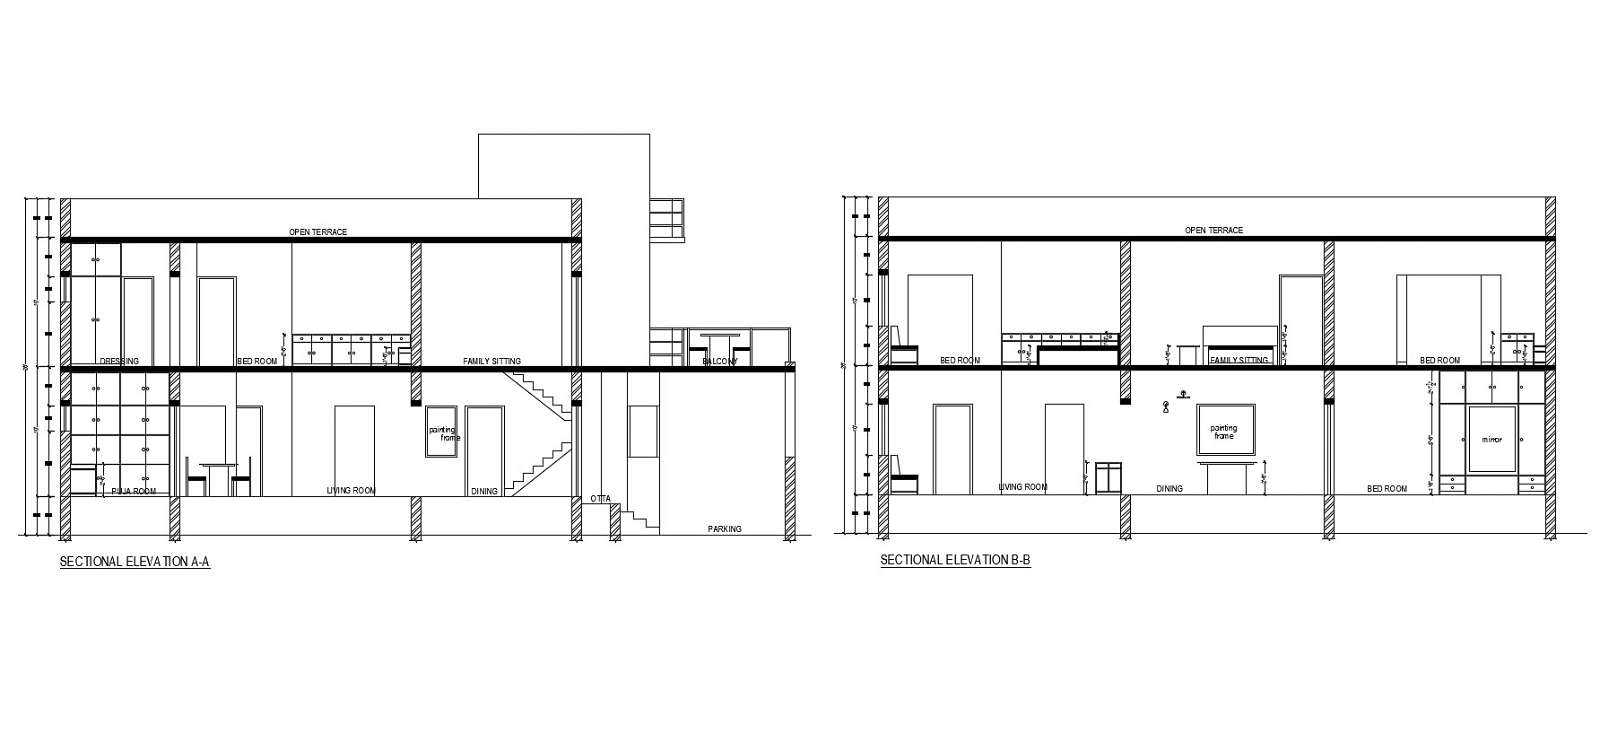 Sectional elevation drawing of 2 storey house in dwg file - Cadbull